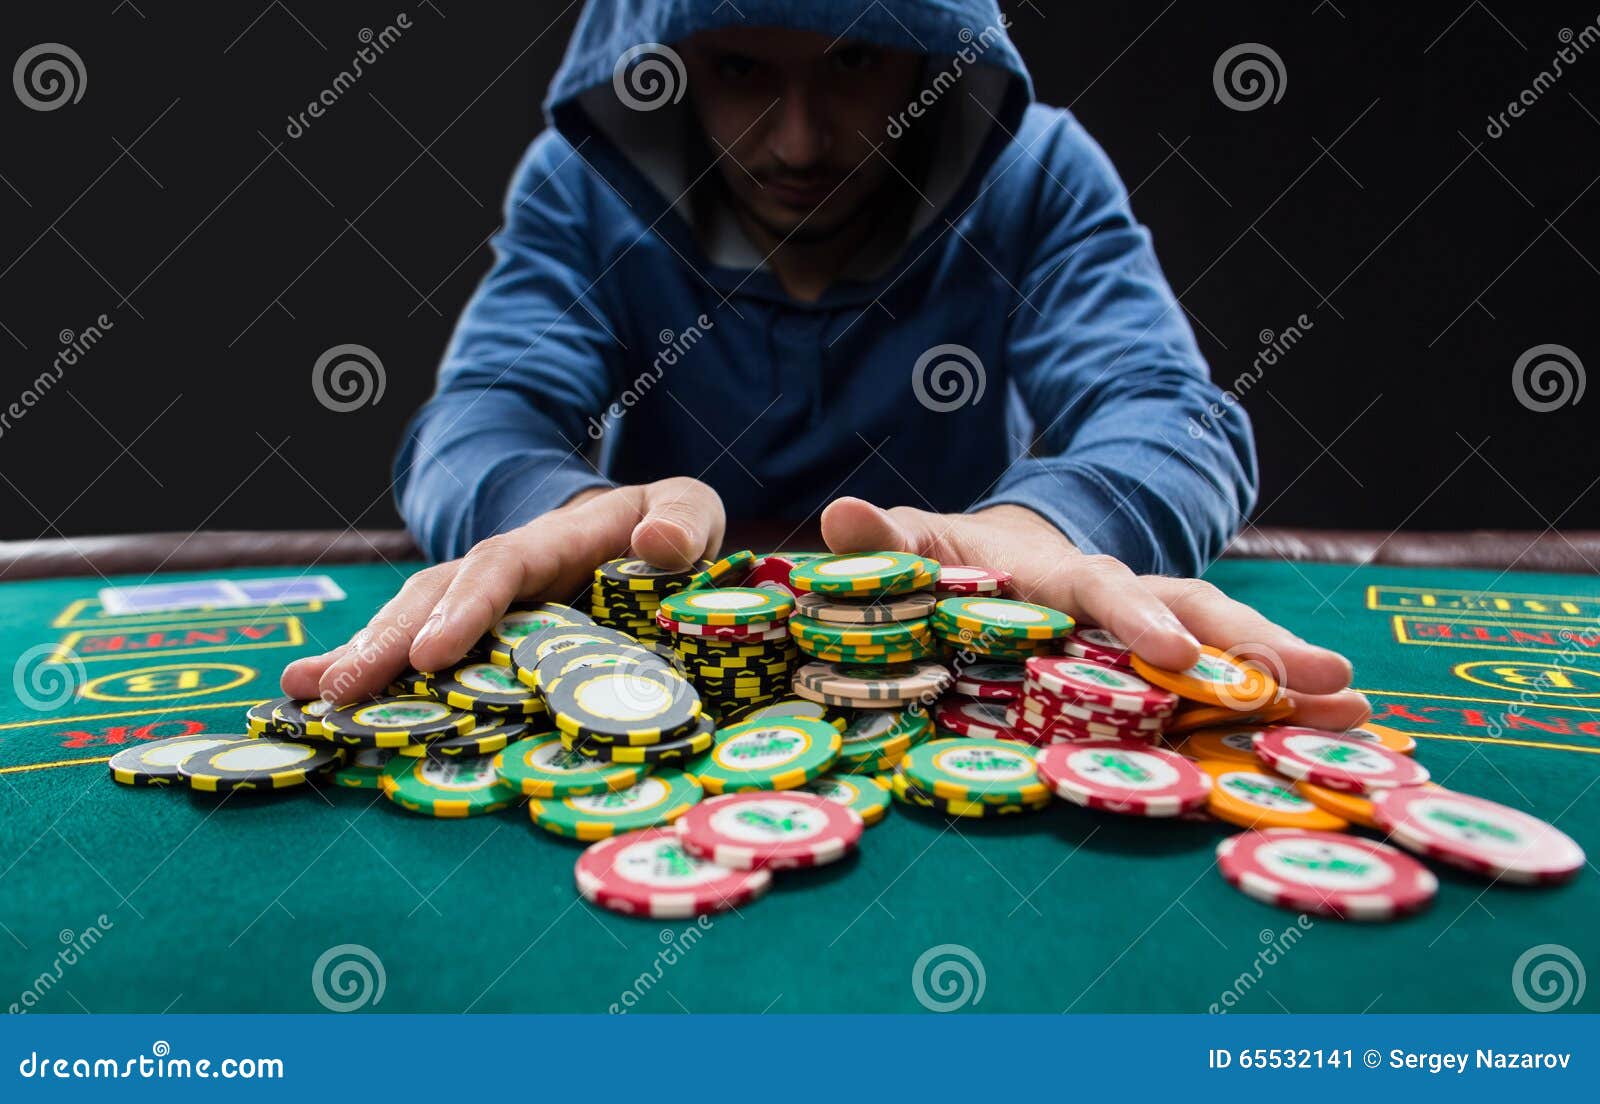 Image result for pushes all chips in